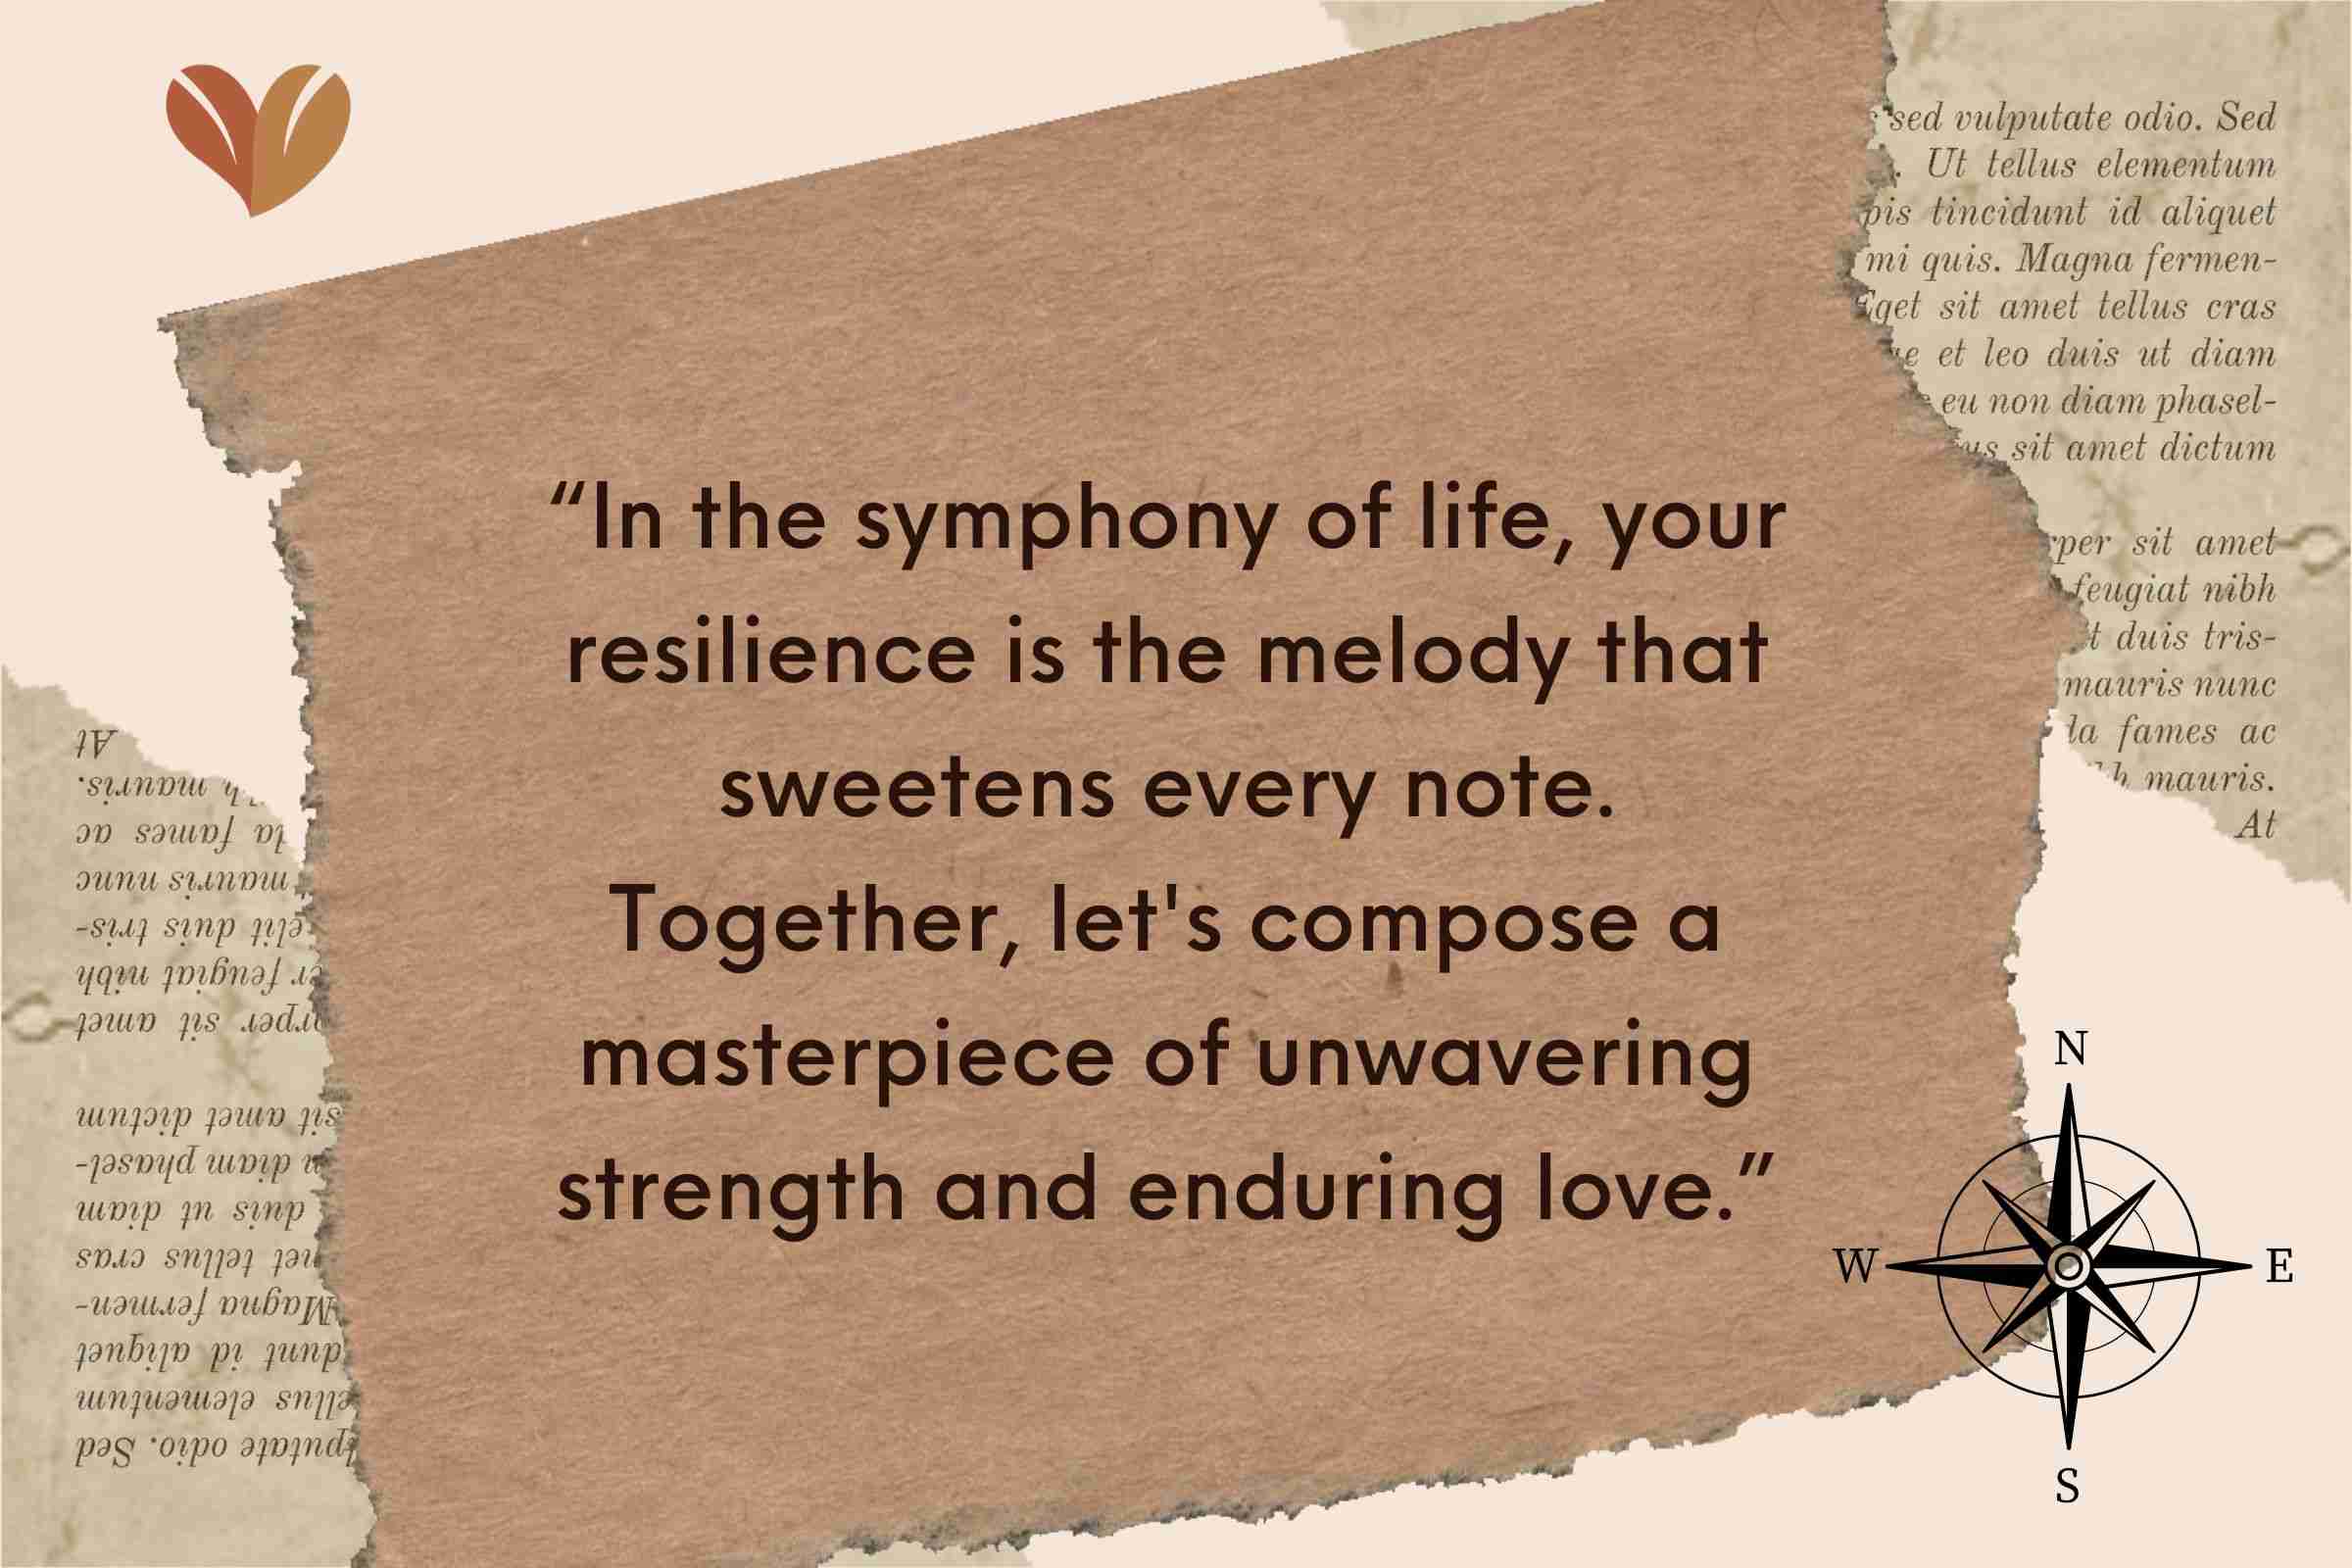 In the symphony of life, your resilience is the melody that sweetens every note